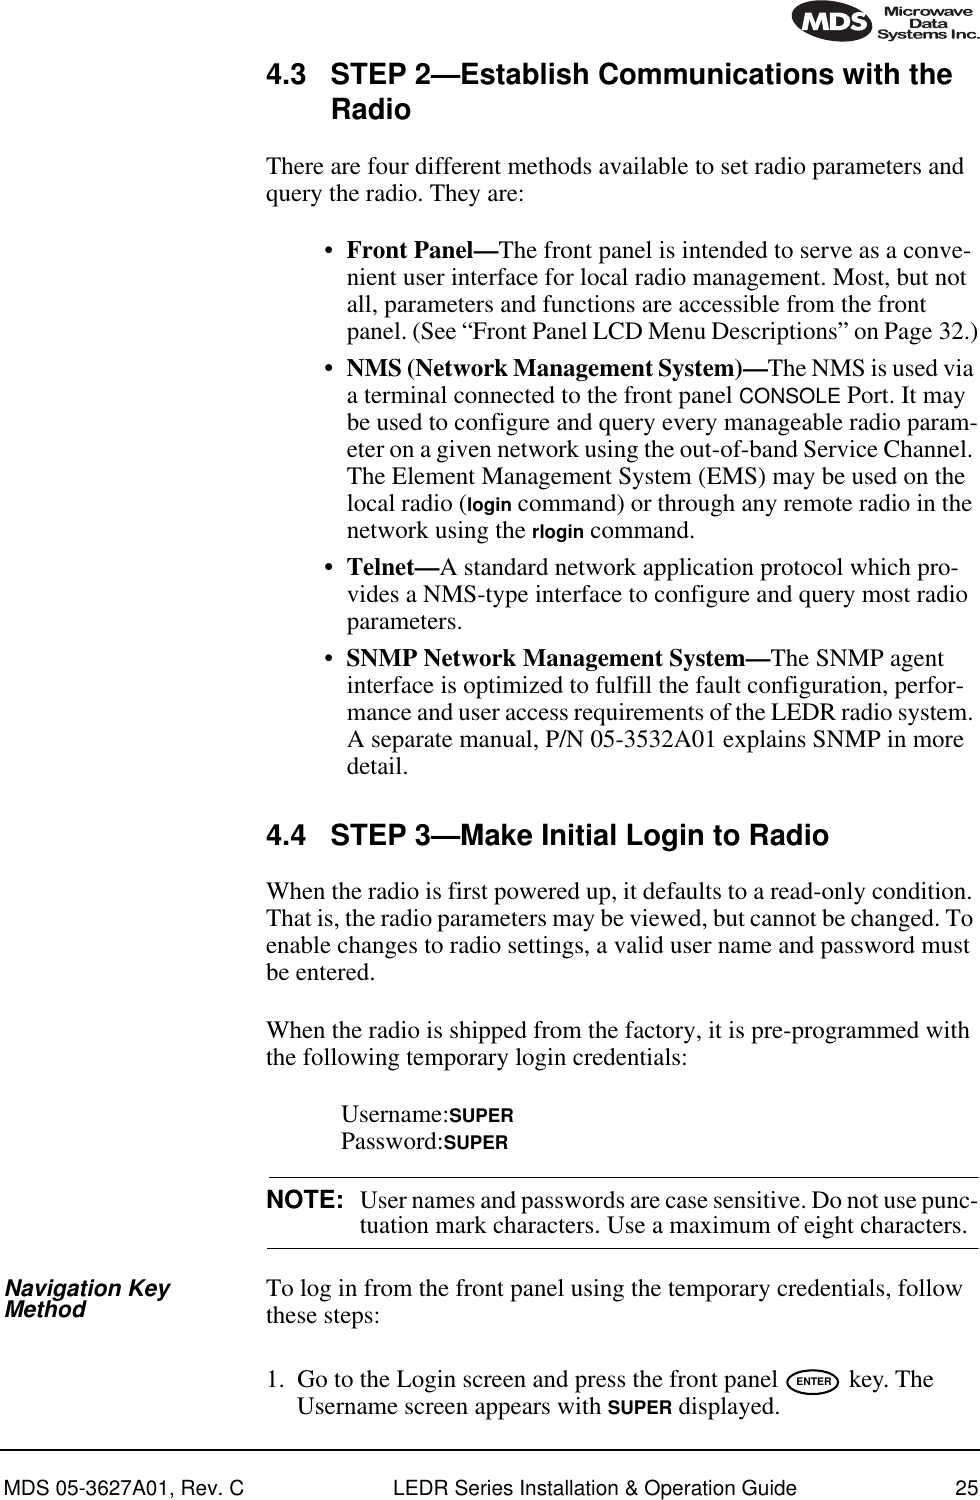 MDS 05-3627A01, Rev. C LEDR Series Installation &amp; Operation Guide 254.3 STEP 2—Establish Communications with the RadioThere are four different methods available to set radio parameters and query the radio. They are:•Front Panel—The front panel is intended to serve as a conve-nient user interface for local radio management. Most, but not all, parameters and functions are accessible from the front panel. (See “Front Panel LCD Menu Descriptions” on Page 32.)• NMS (Network Management System)—The NMS is used via a terminal connected to the front panel CONSOLE Port. It may be used to configure and query every manageable radio param-eter on a given network using the out-of-band Service Channel. The Element Management System (EMS) may be used on the local radio (login command) or through any remote radio in the network using the rlogin command.• Telnet—A standard network application protocol which pro-vides a NMS-type interface to configure and query most radio parameters.•SNMP Network Management System—The SNMP agent interface is optimized to fulfill the fault configuration, perfor-mance and user access requirements of the LEDR radio system. A separate manual, P/N 05-3532A01 explains SNMP in more detail.4.4 STEP 3—Make Initial Login to RadioWhen the radio is first powered up, it defaults to a read-only condition. That is, the radio parameters may be viewed, but cannot be changed. To enable changes to radio settings, a valid user name and password must be entered.When the radio is shipped from the factory, it is pre-programmed with the following temporary login credentials:Username:SUPERPassword:SUPERNOTE: User names and passwords are case sensitive. Do not use punc-tuation mark characters. Use a maximum of eight characters.Navigation Key Method To log in from the front panel using the temporary credentials, follow these steps:1. Go to the Login screen and press the front panel   key. The Username screen appears with SUPER displayed.ENTER